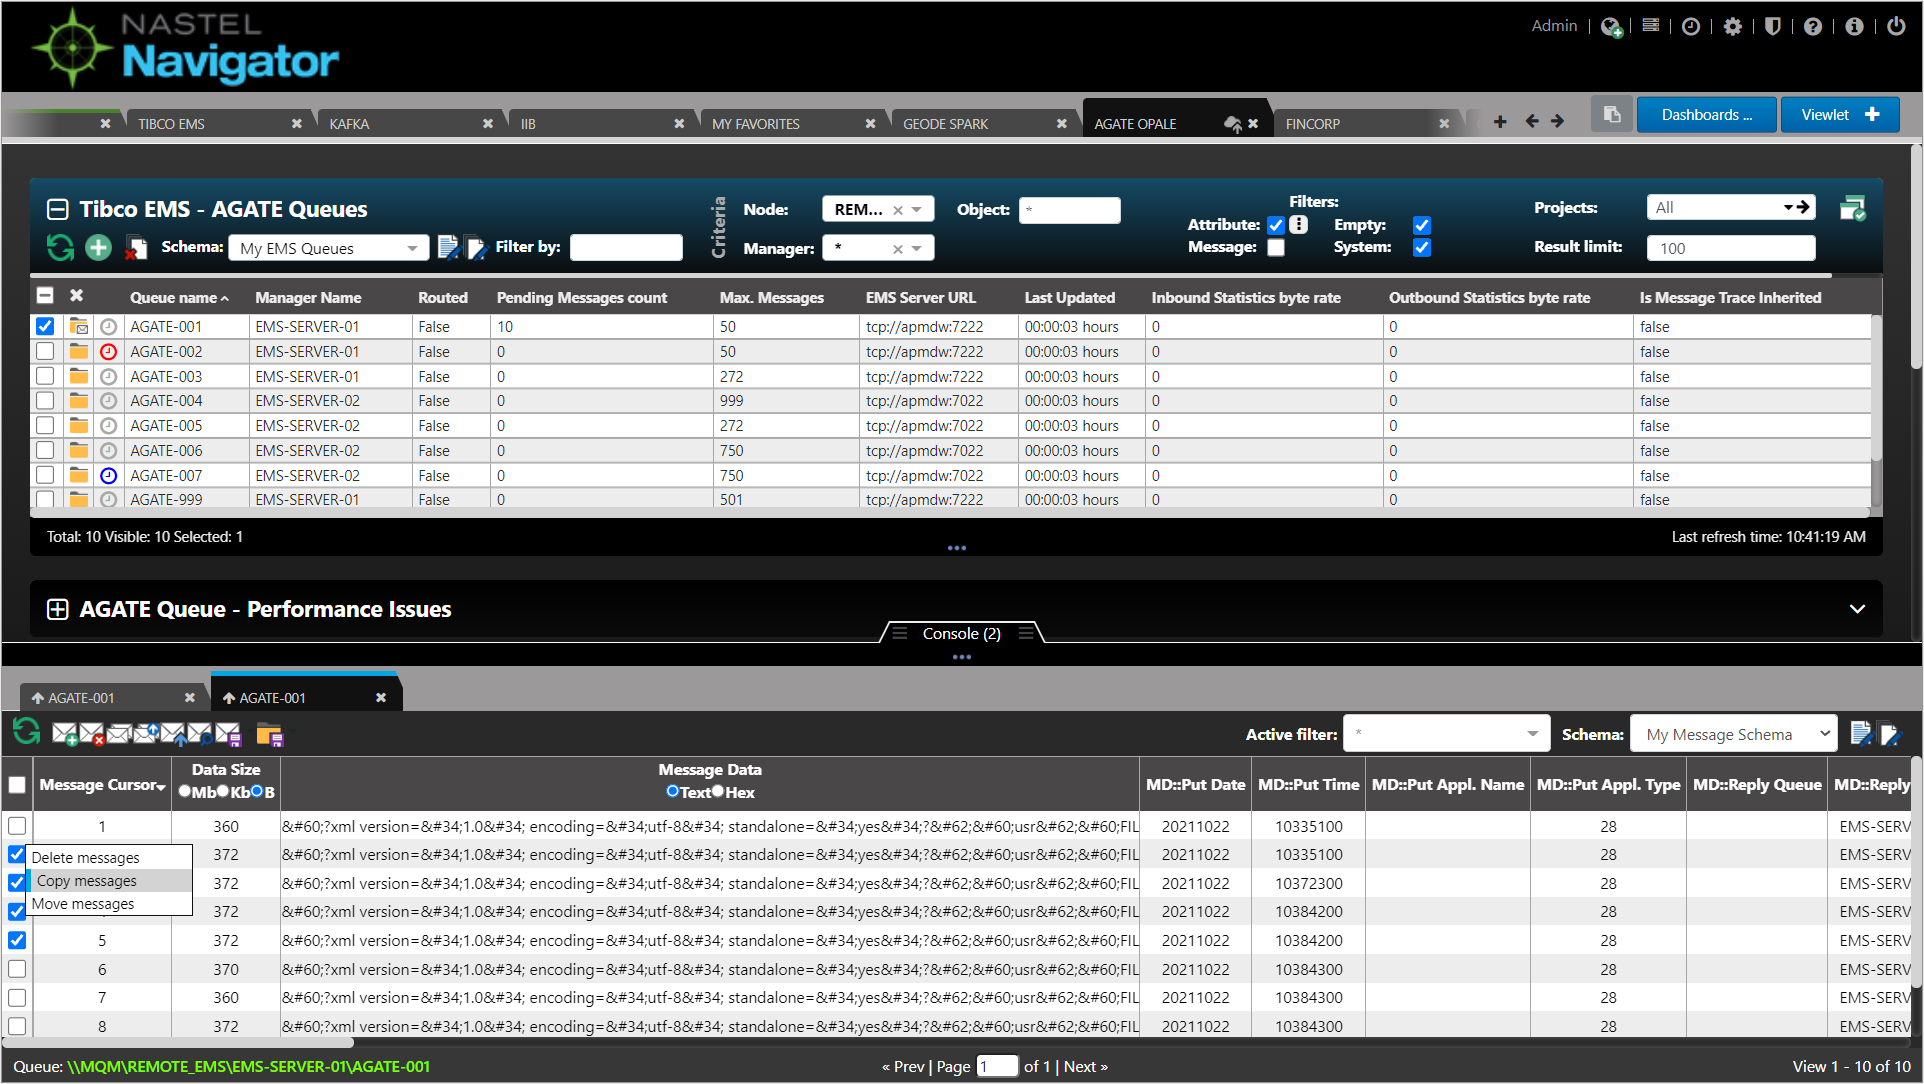 Manage your entire TIBCO EMS estate from a single screen